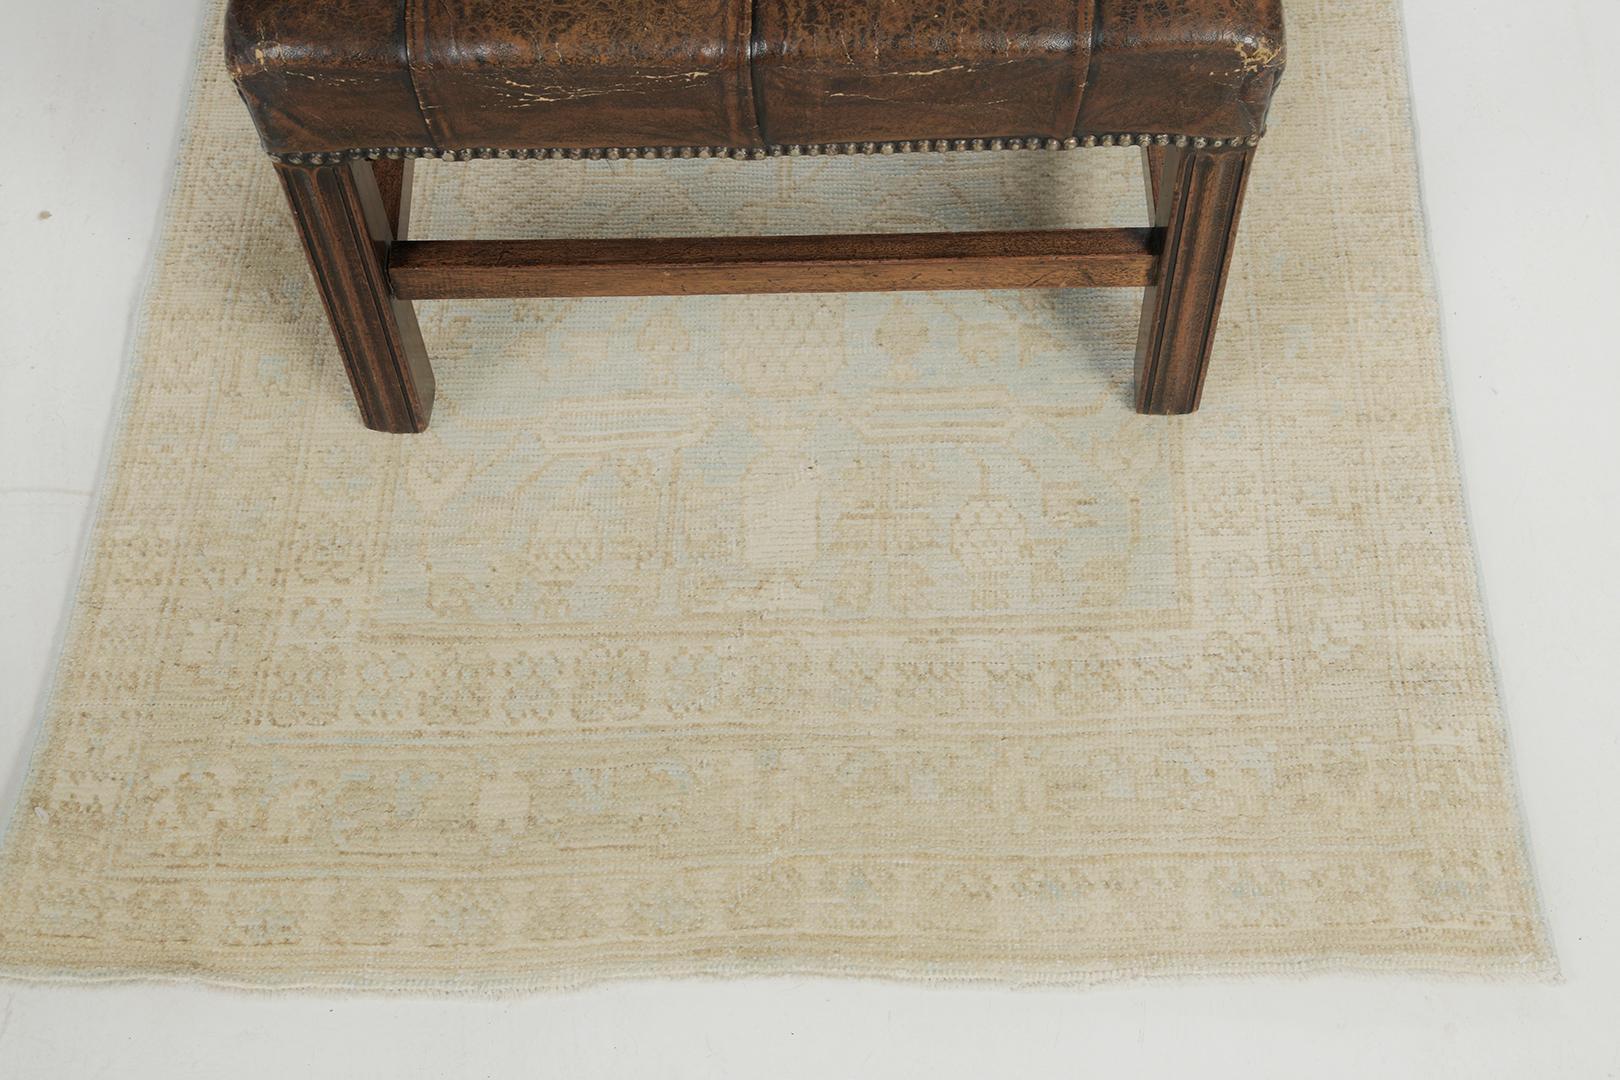 Patterned-positioned pomegranates and ornaments in neutral tones dominate the entire pattern of the runner. An excellent pile-woven wool vintage style Khotan design from our Muted Re-Creations collection has come and flexed its versatility. Stunning